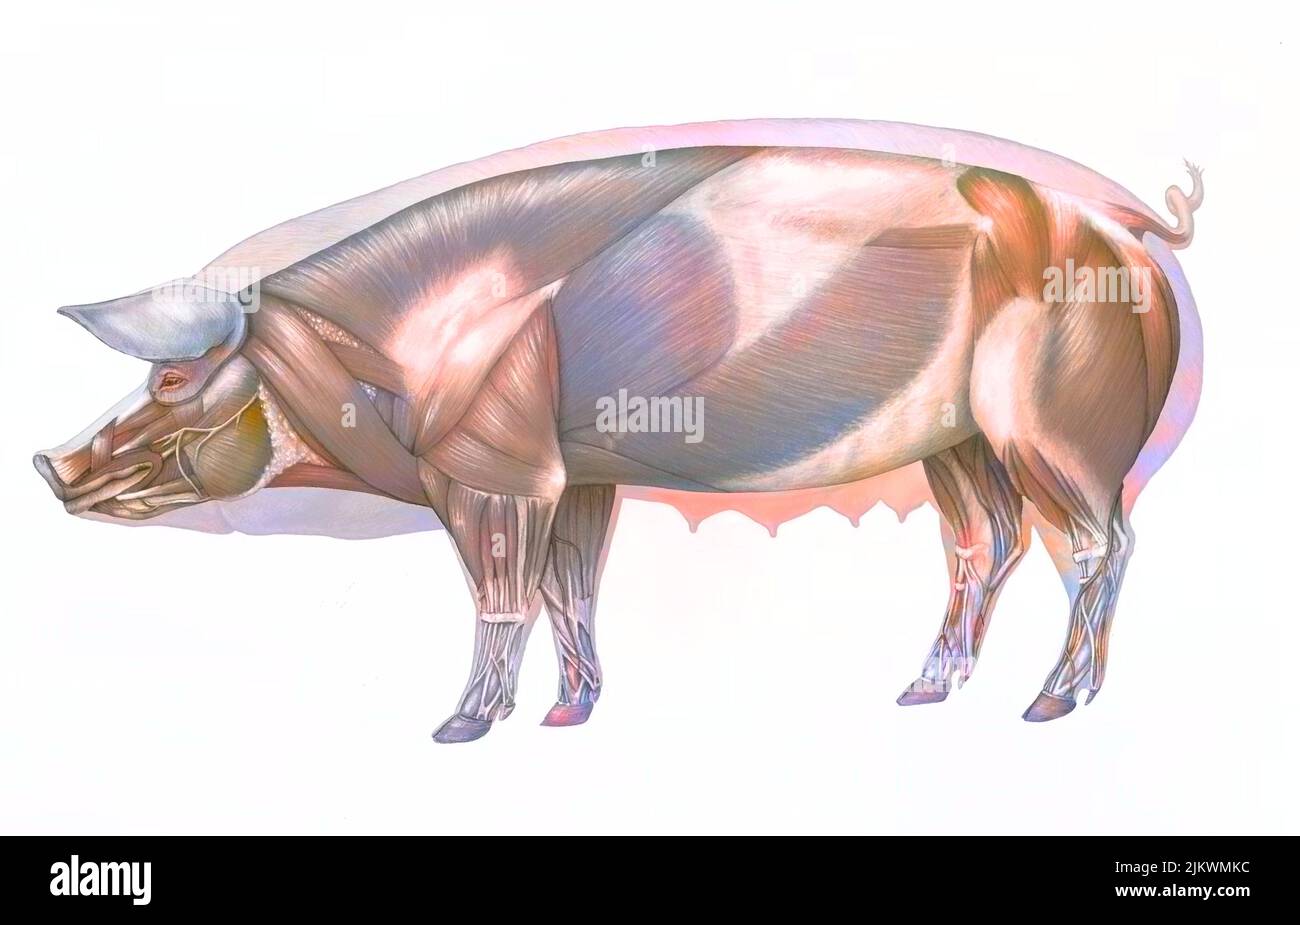 Pig anatomy with its muscular system. Stock Photo